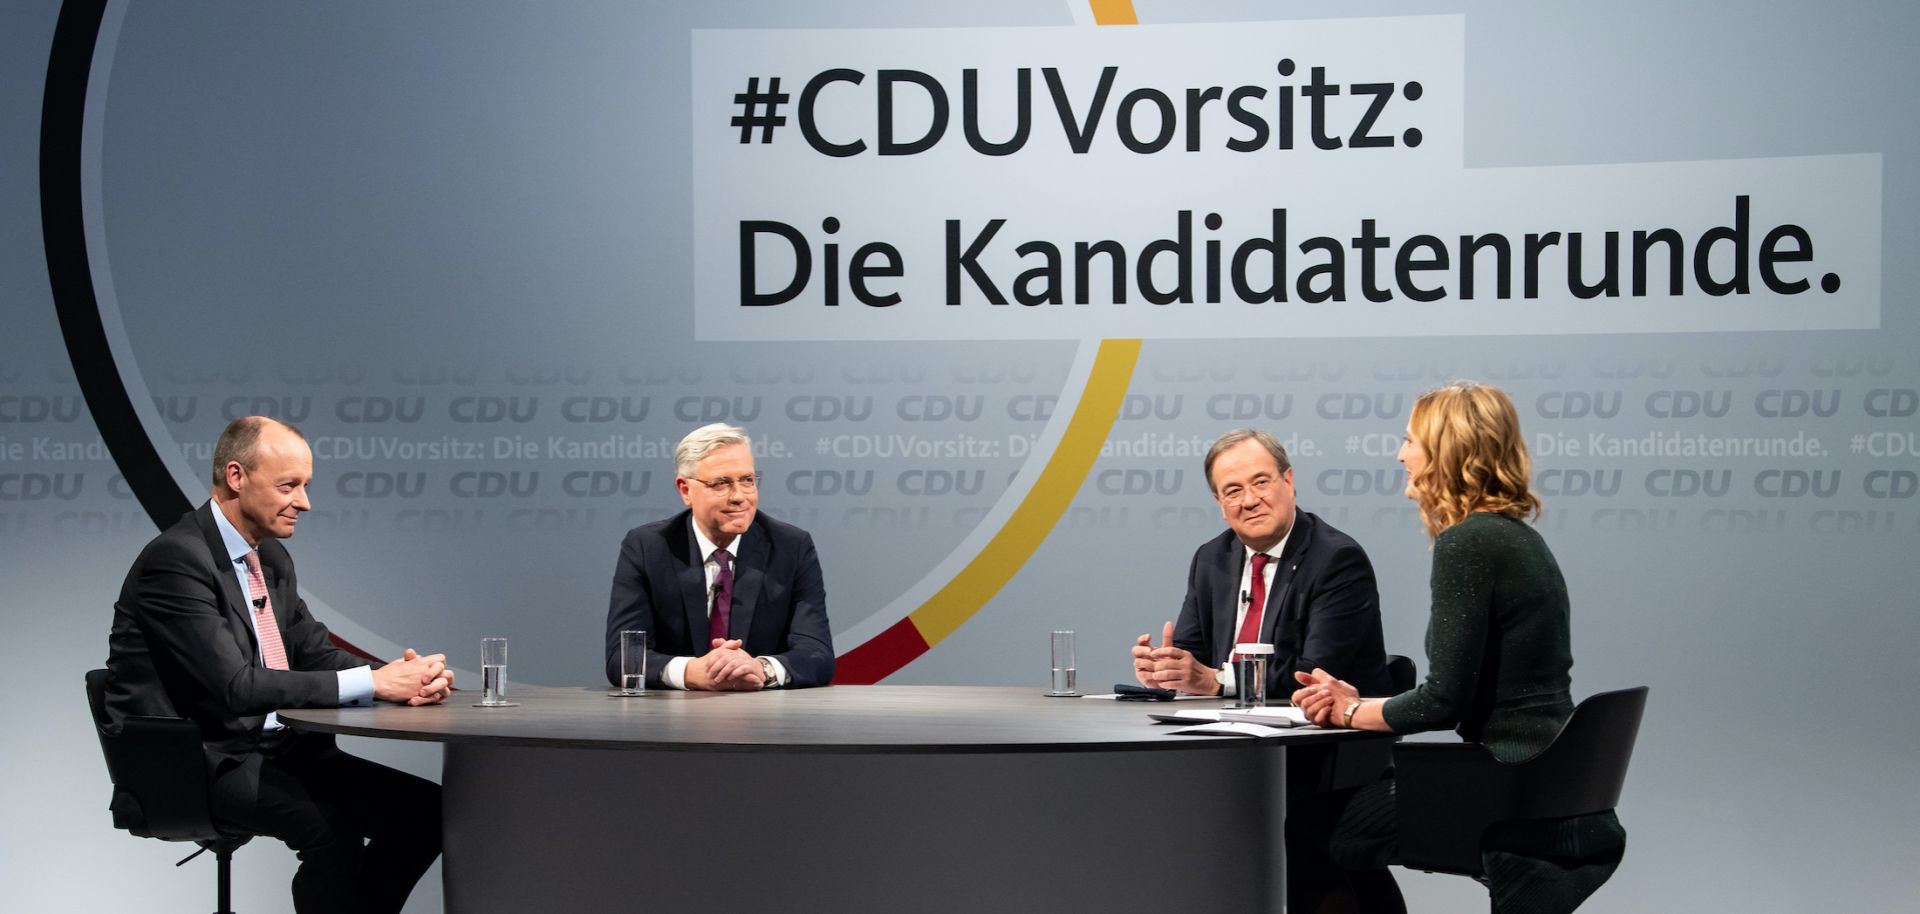 German journalist Tanja Samrotzki (right) moderates a panel with the candidates vying for the leadership post of Chancellor Angela Merkel’s Christian Democratic Union (CDU) party -- Friedrich Merz, Norbert Roettgen and Armin Laschet (from left to right) -- on Dec. 14, 2020, in Berlin, Germany.